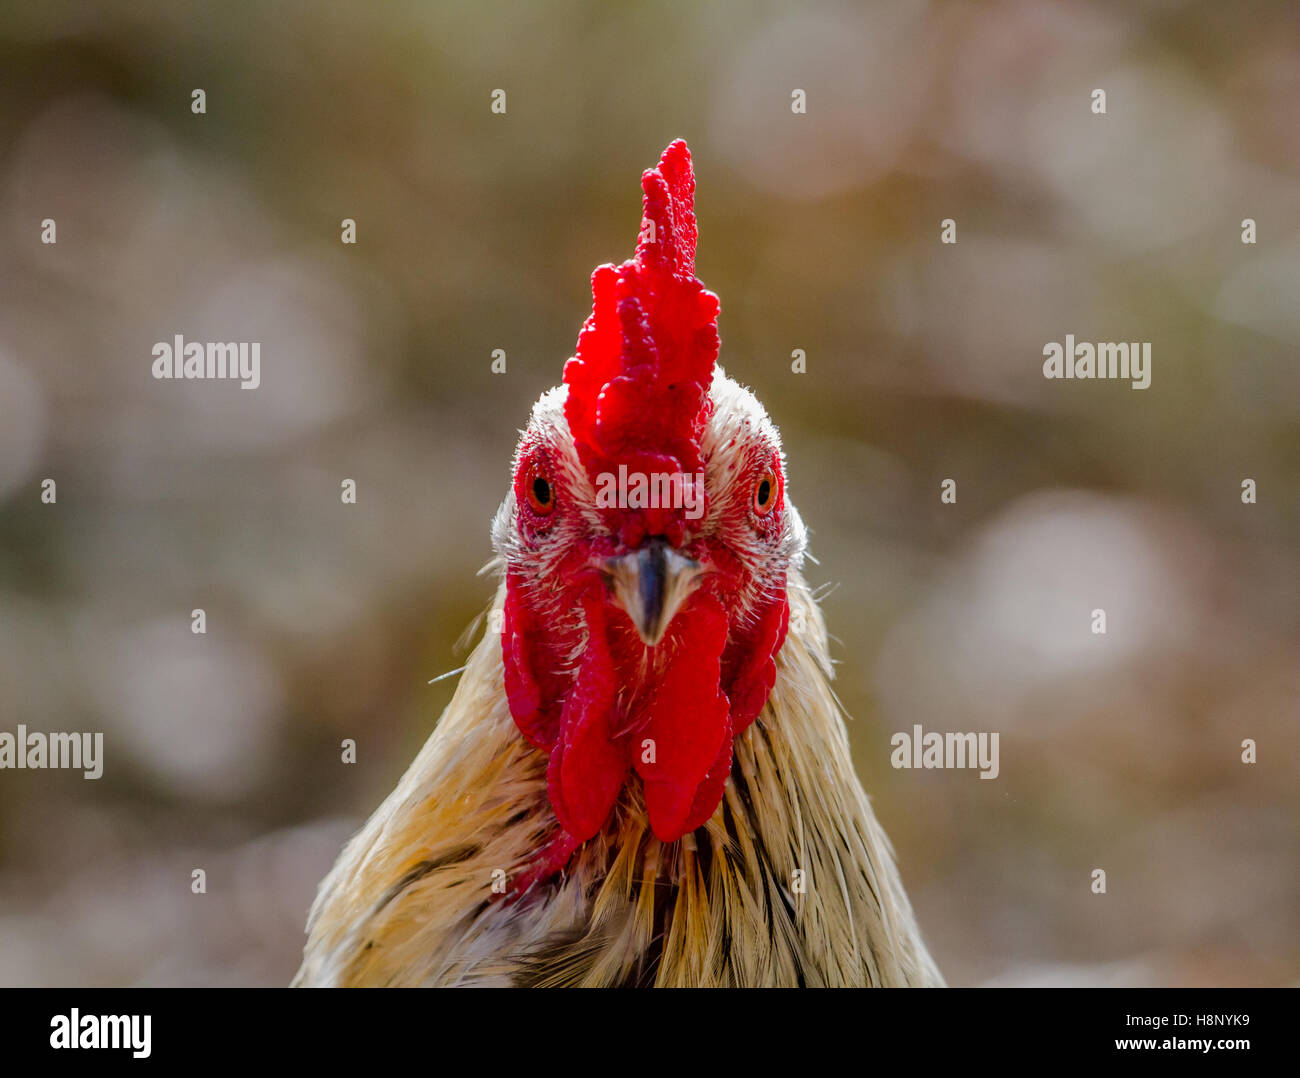 Adult male chicken posing for the camera Stock Photo